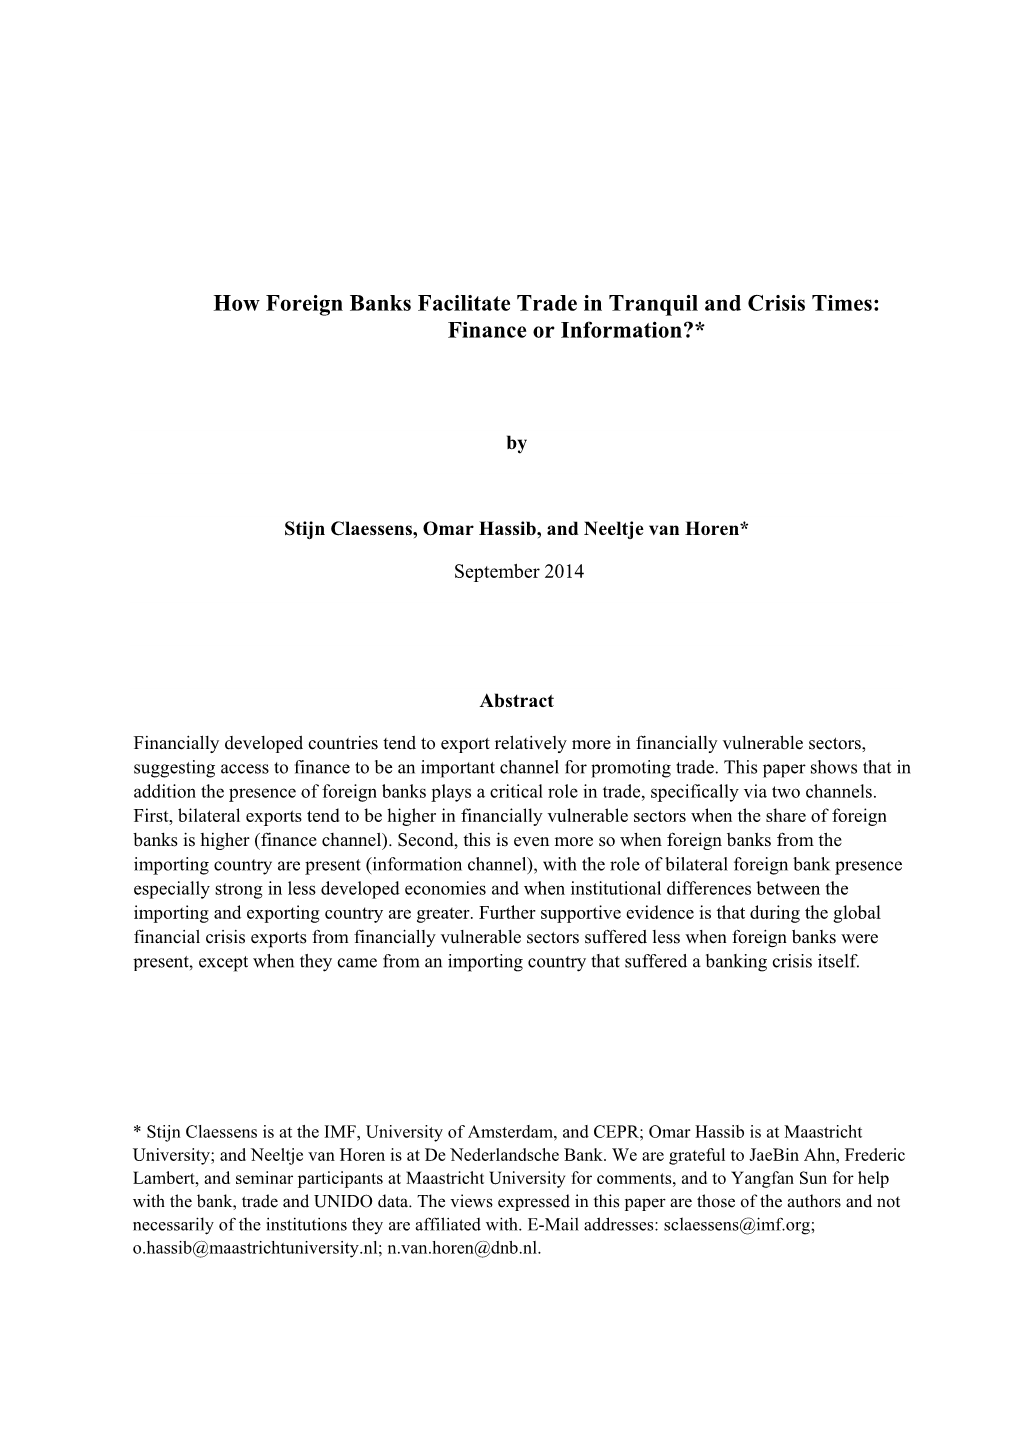 How Foreign Banks Facilitate Trade in Tranquil and Crisis Times: Finance Or Information?*